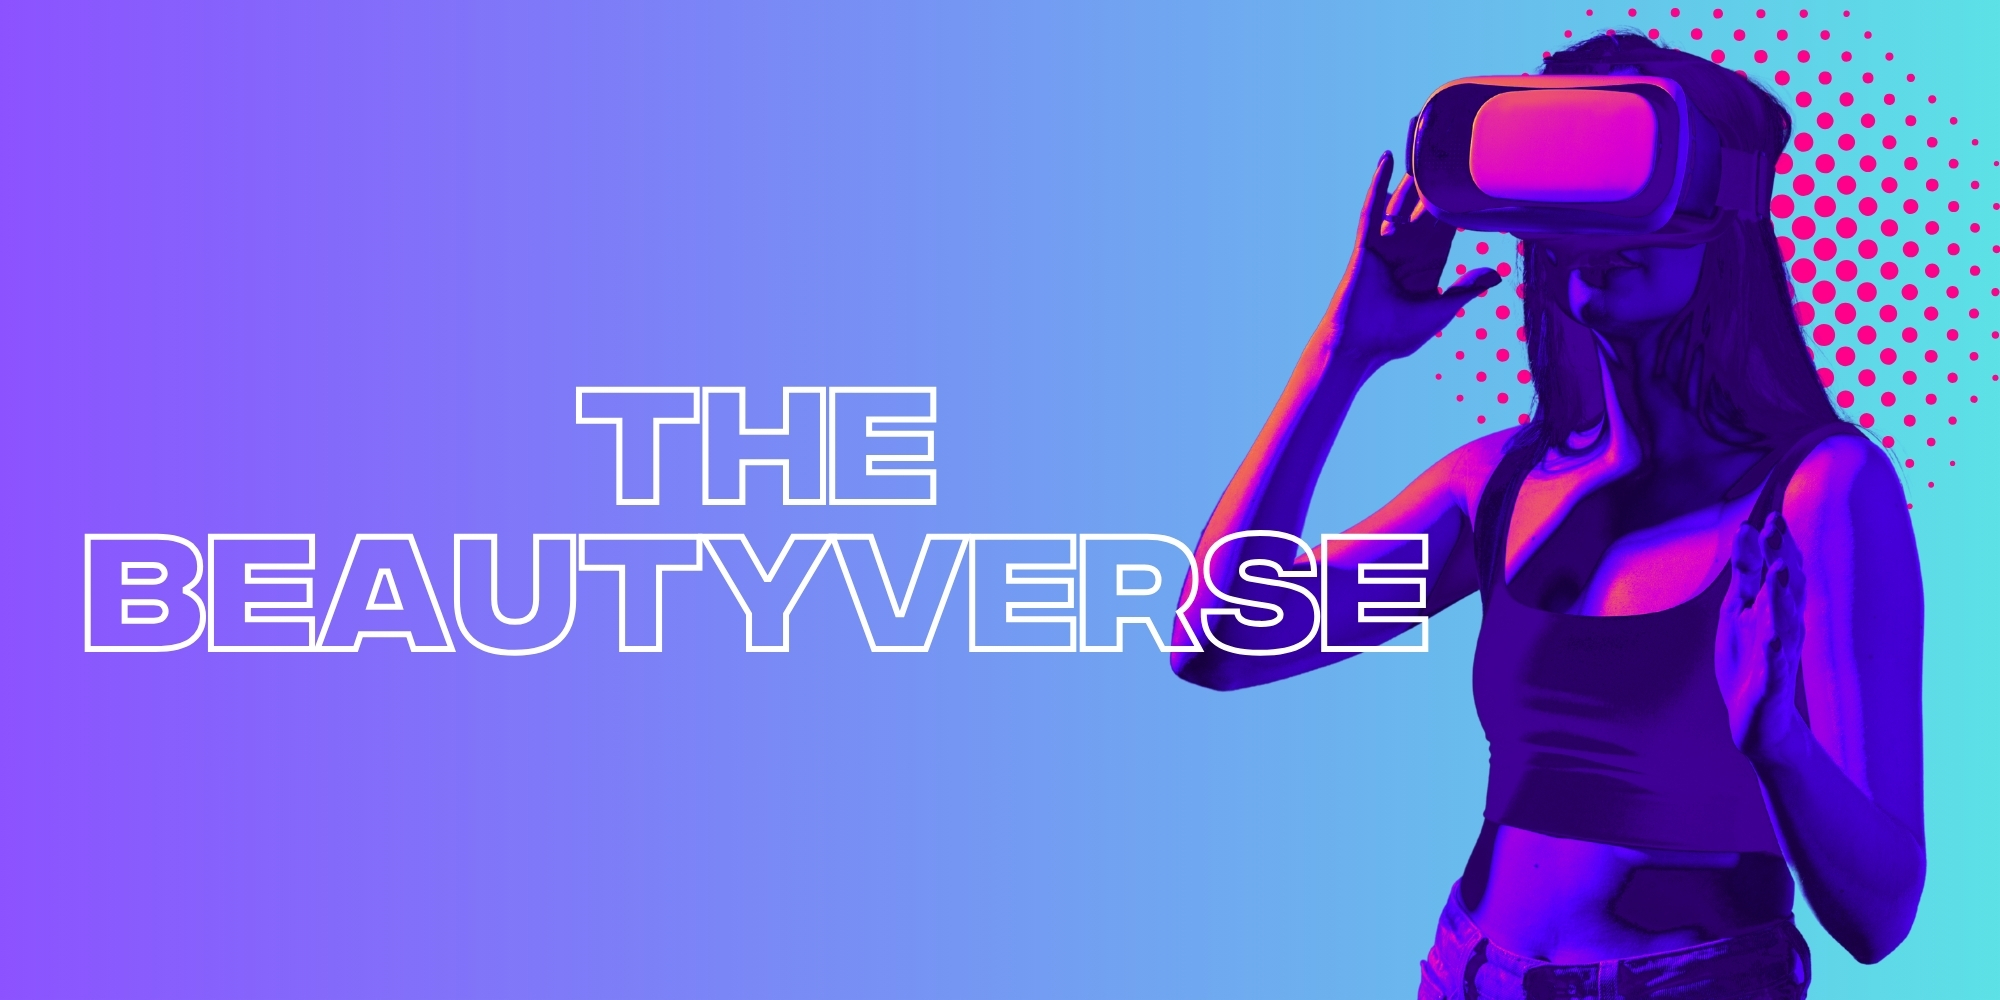 How Prominent Is Metaverse Marketing For The Beauty Industry?